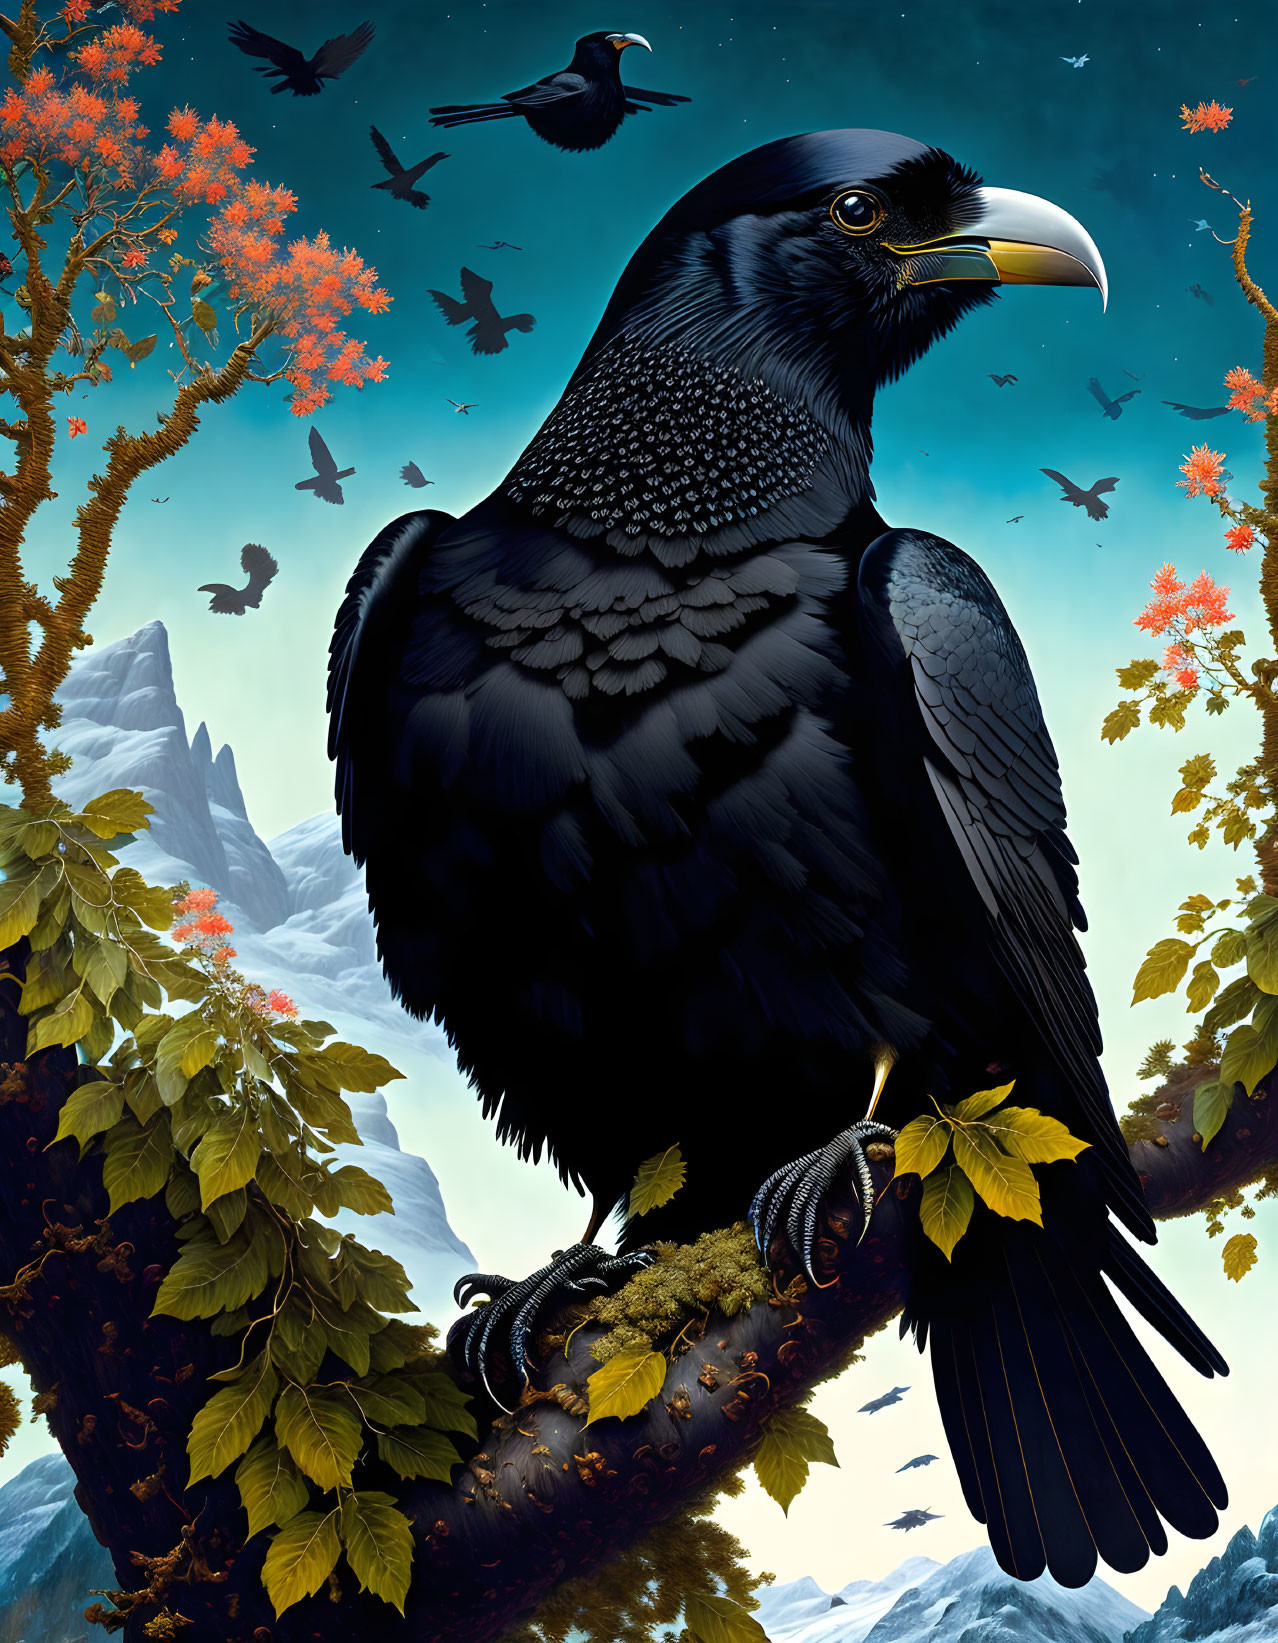 Detailed illustration of black crow on branch with vibrant foliage against mountain backdrop.